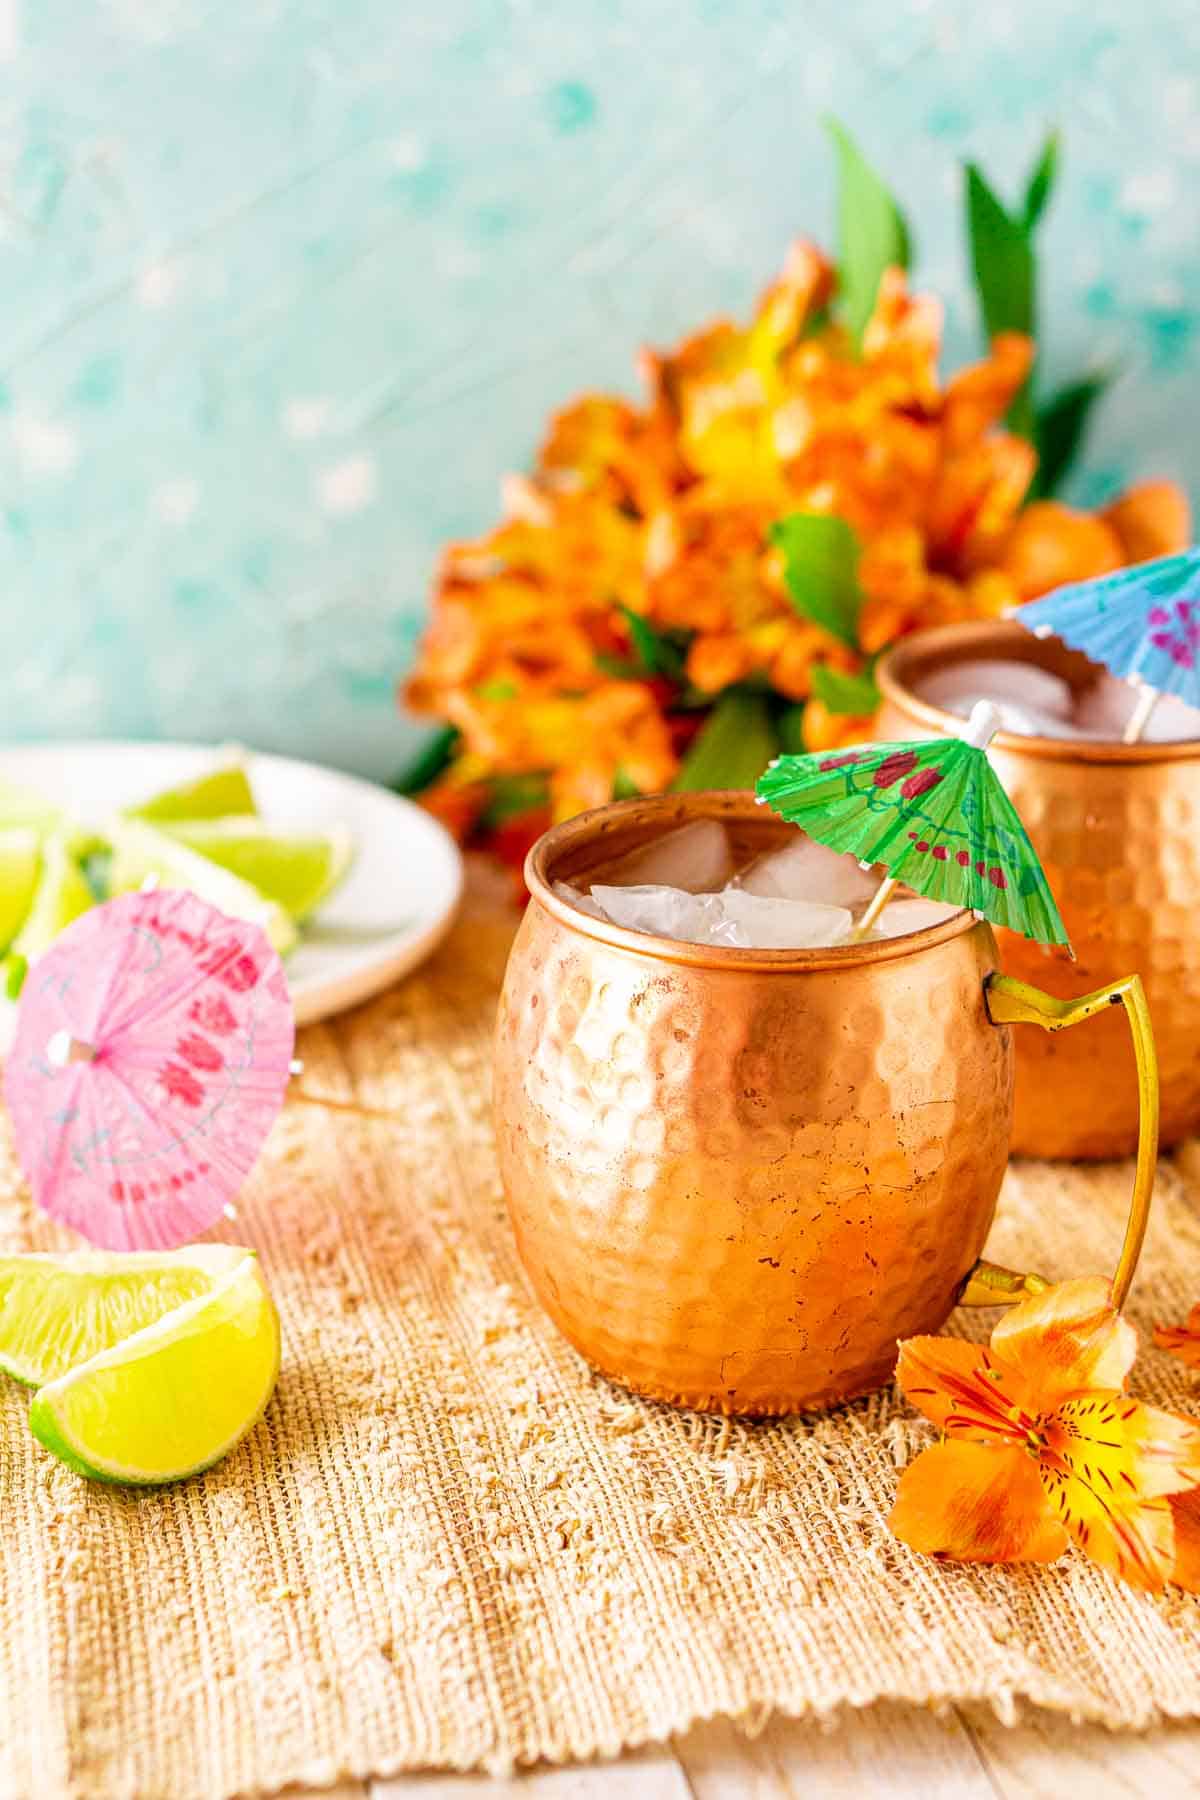 A side view of a Jamaican mule on a straw placemat with lime slices and orange flowers around it.